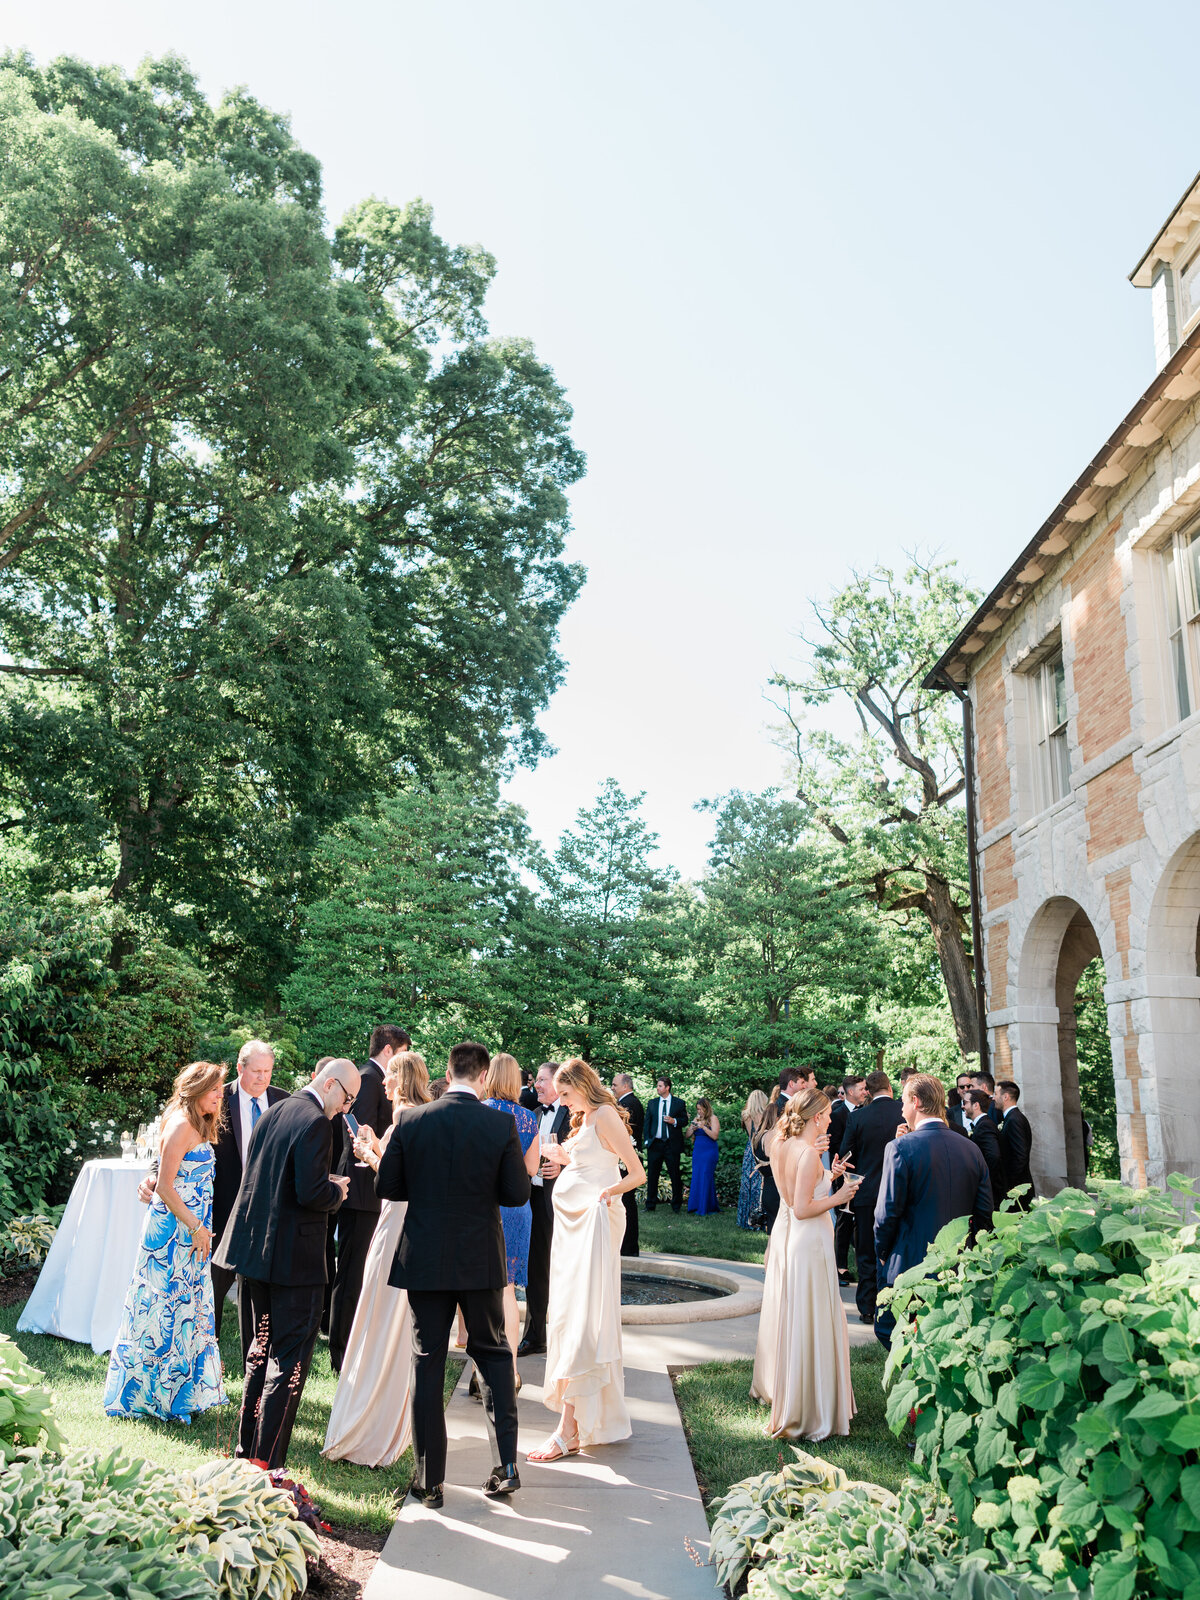 Liz Andolina Photography Destination Wedding Photographer in Italy, New York, Across the East Coast Editorial, heritage-quality images for stylish couples MK & Achille-Liz Andolina Photography-796